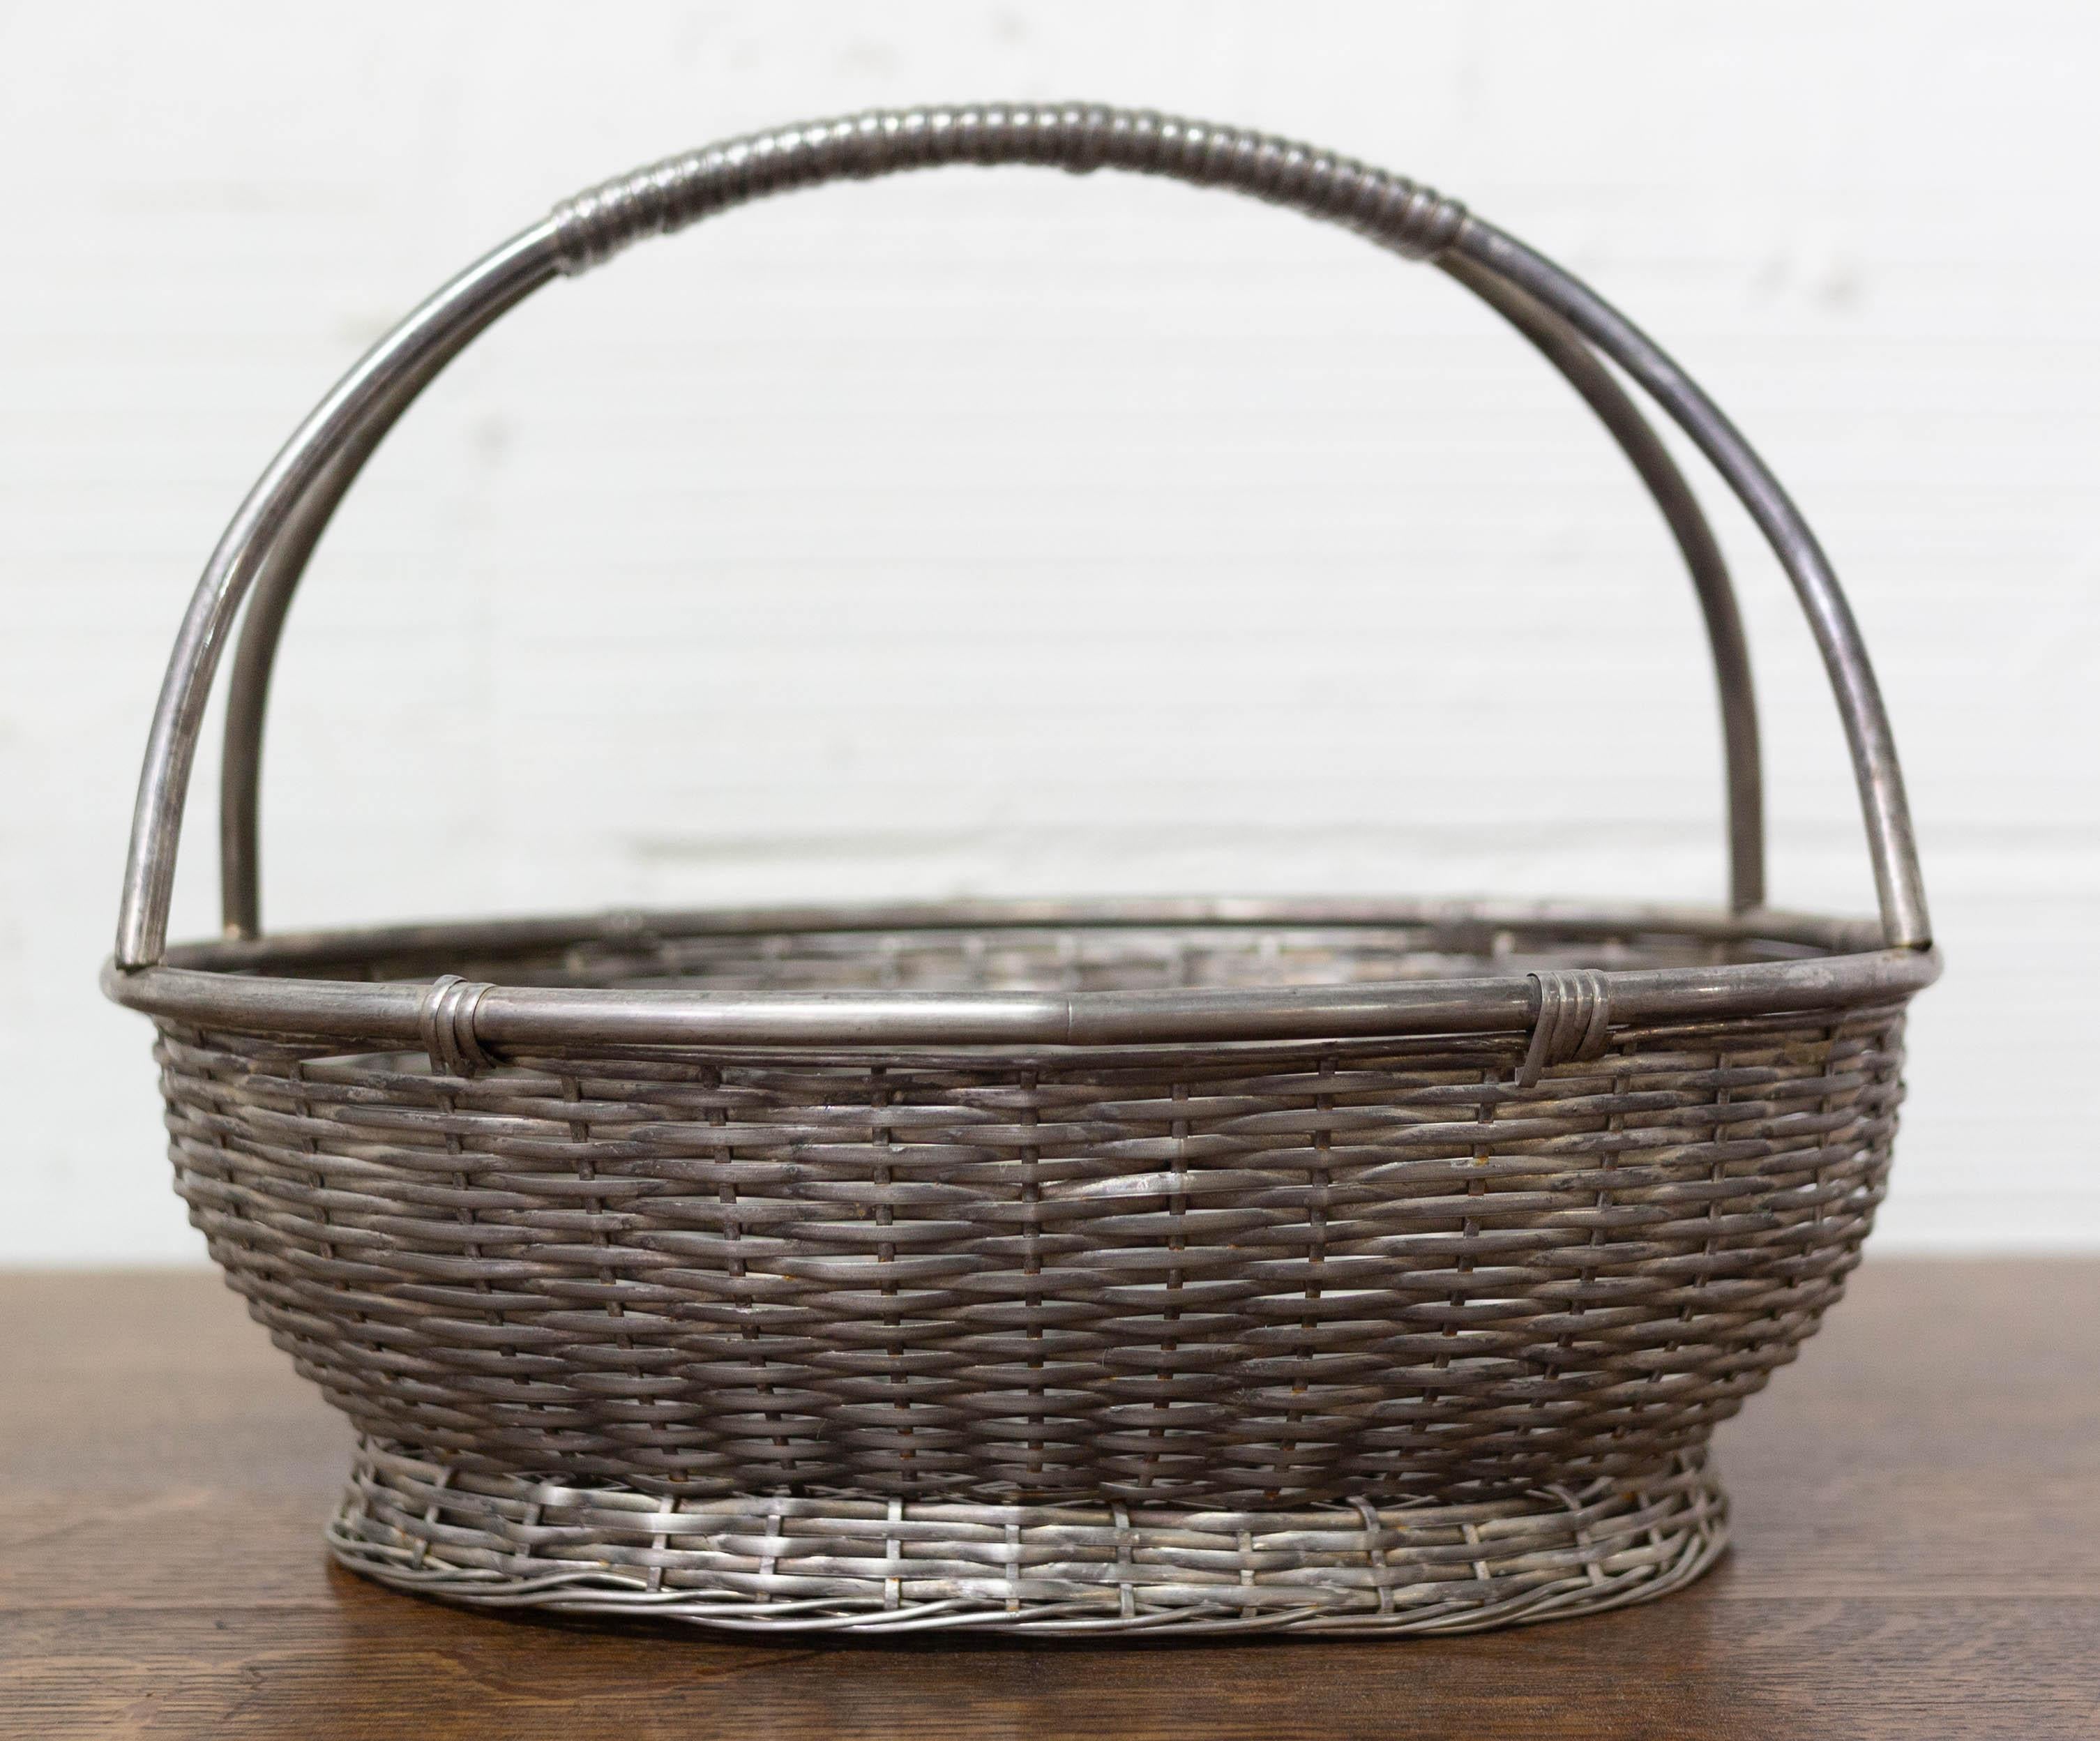 Aluminium basket centerpiece from France, circa 1950
Good condition.
 
Shipping:
L 26/ P19.5/ H21 0.72 kg